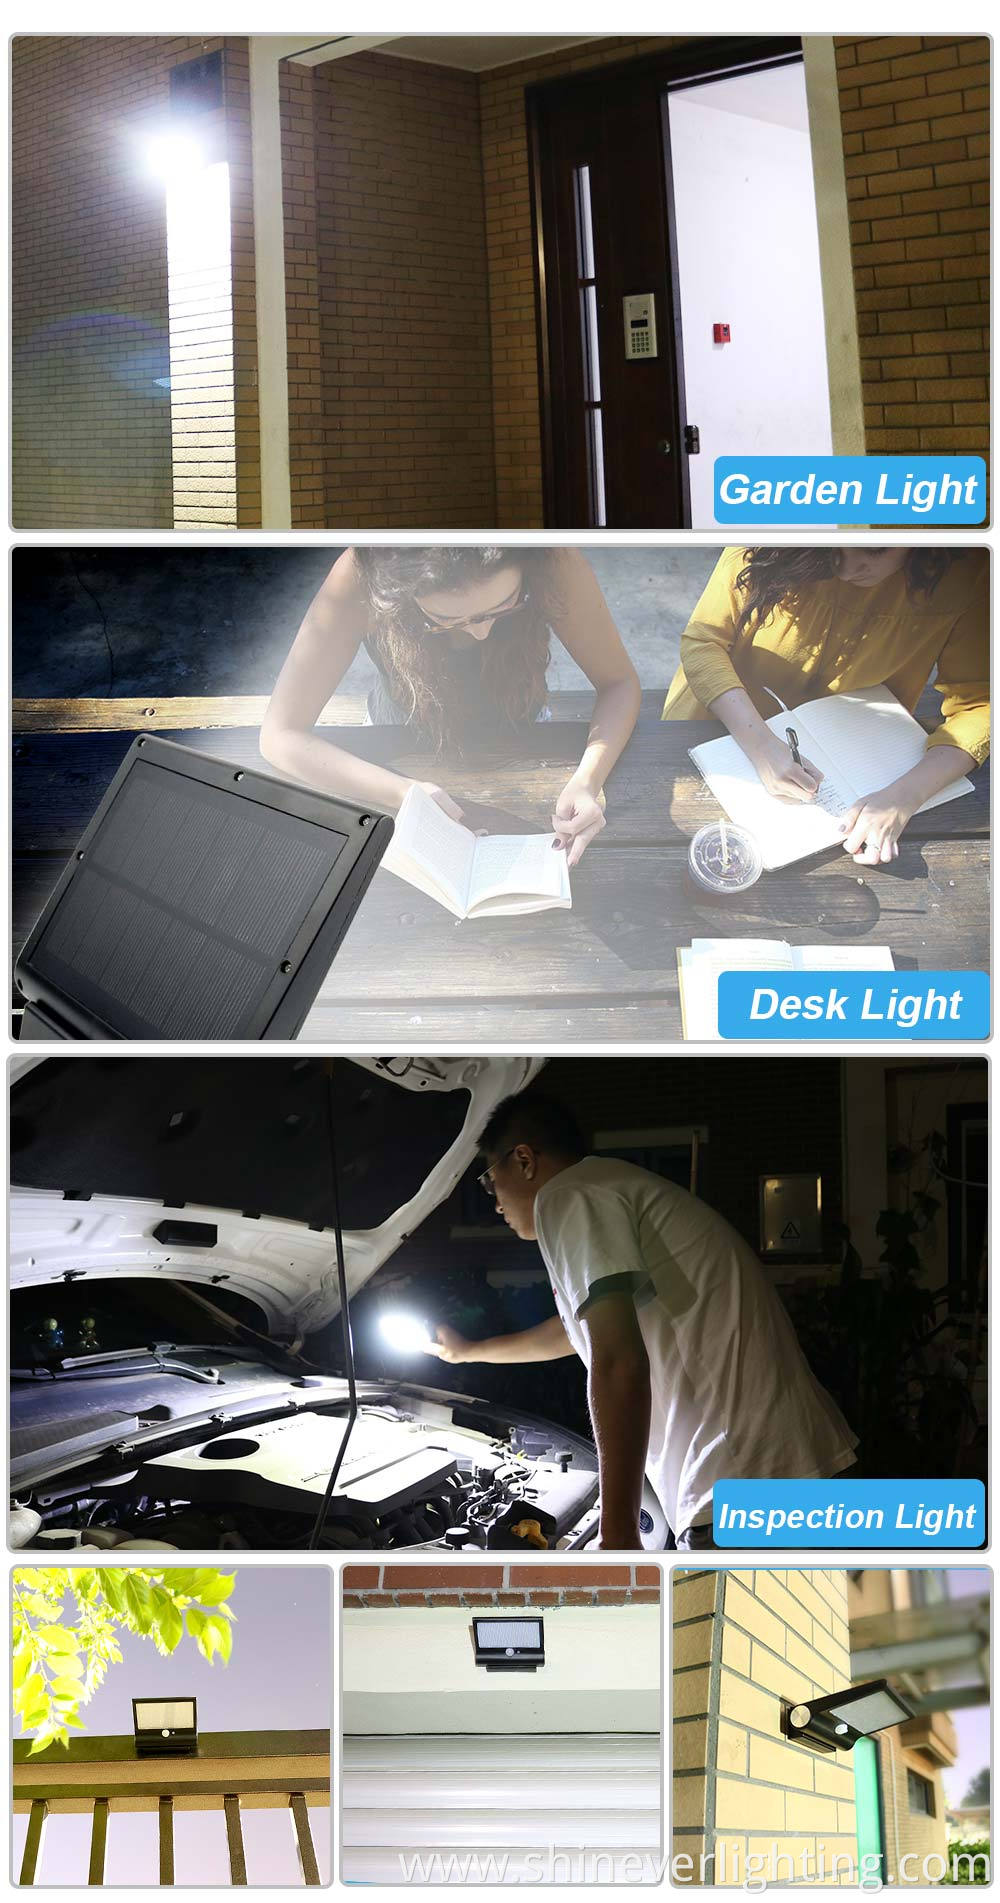 Energy-saving LED outdoor security light